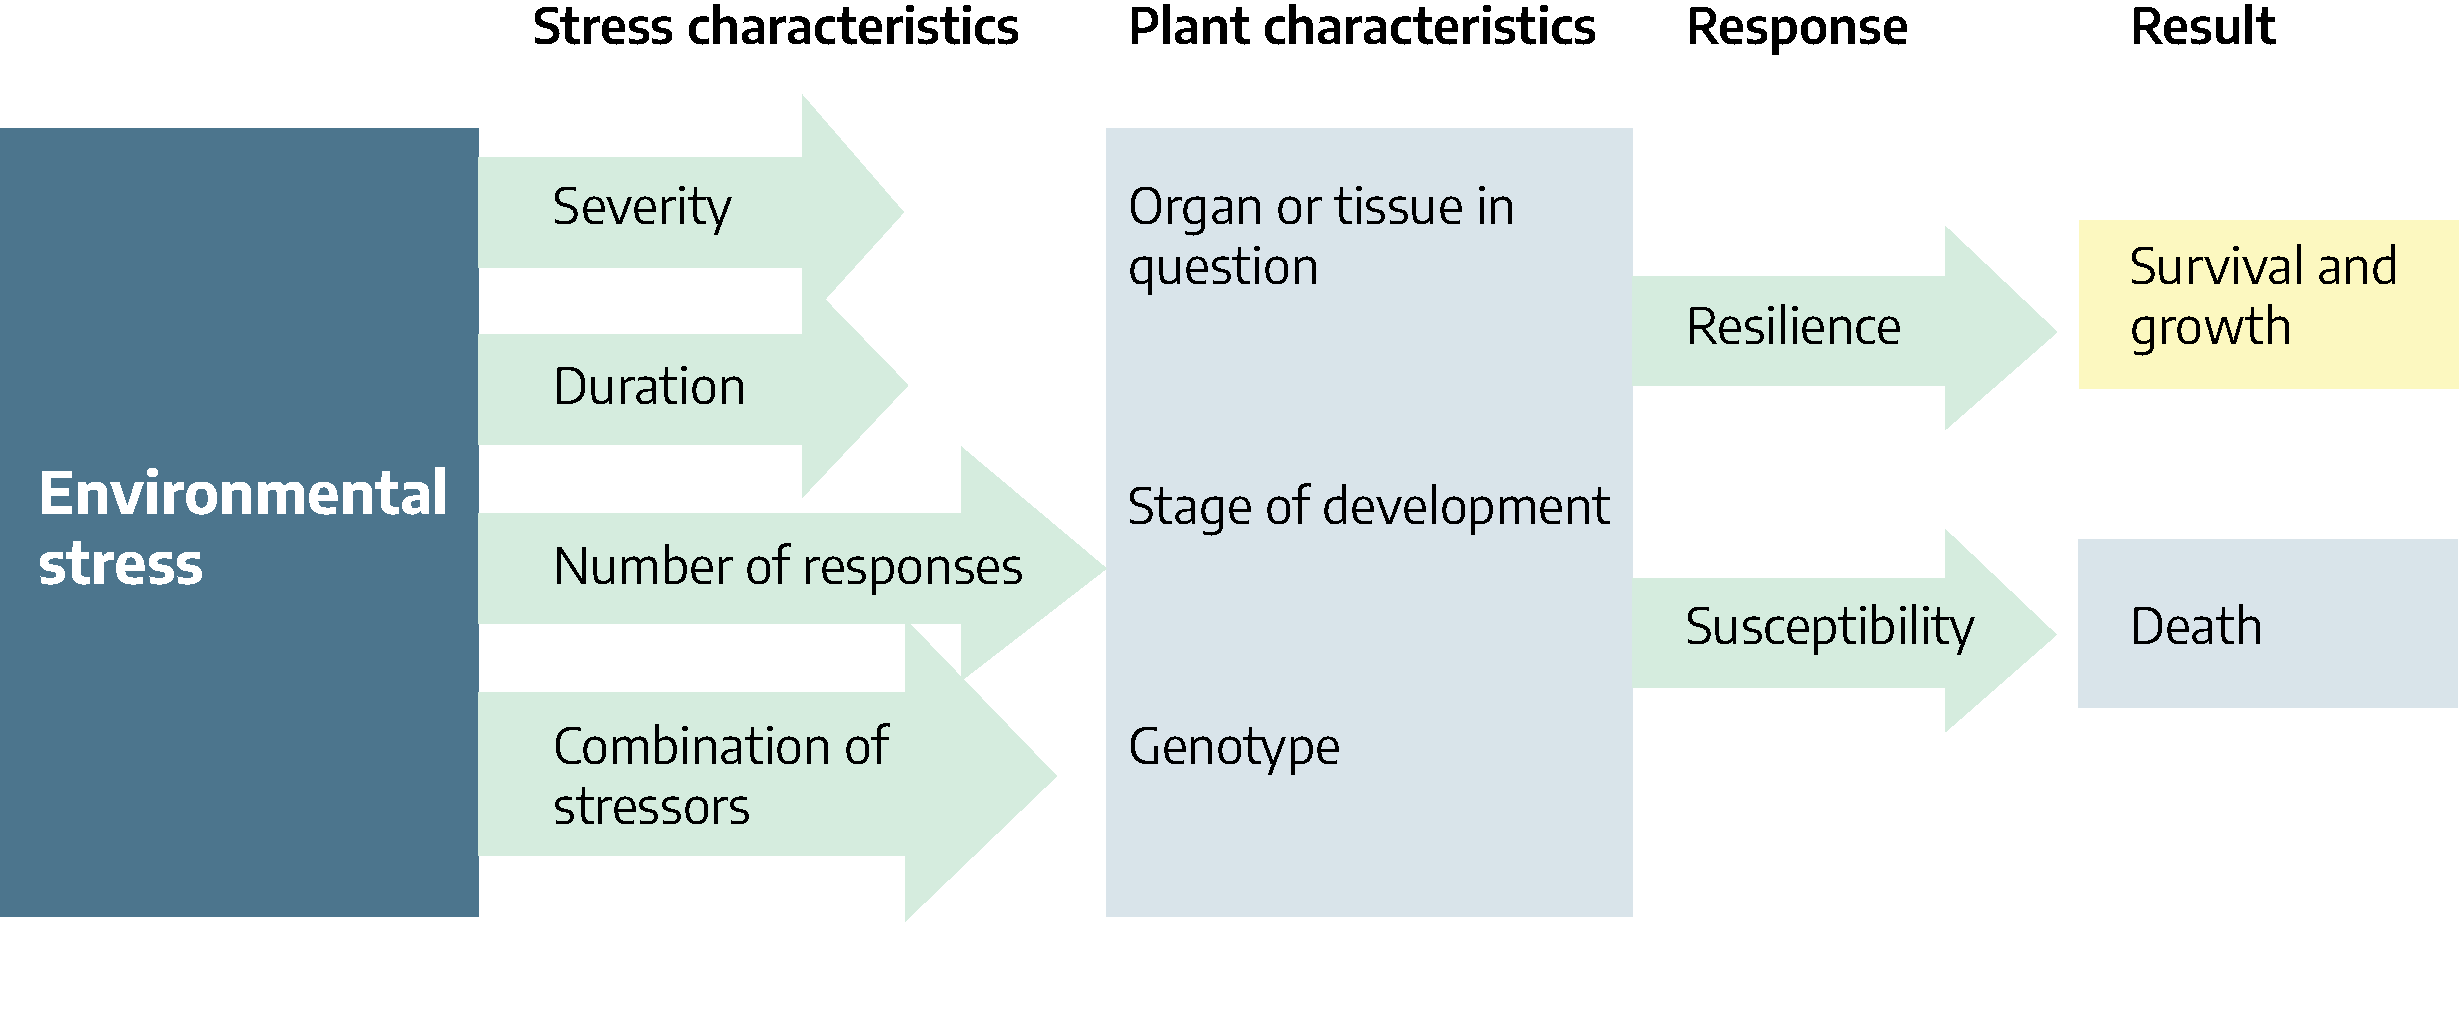 Flow diagram with a large box labeled "environmental stress" at the left. Arrows extend from the box under the heading "stress characteristics"; arrows are labeled: severity, duration, number of responses, and combination of stressors. Arrows point to a box labeled "plant characteristics" that includes: organ or tissue in question, stage of development, genotype. Arrows labeled "response" point to boxes in a column labeled "result." Arrow with word "resilience" points to "survival and growth" and arrow labeled "susceptibility" points to "death."